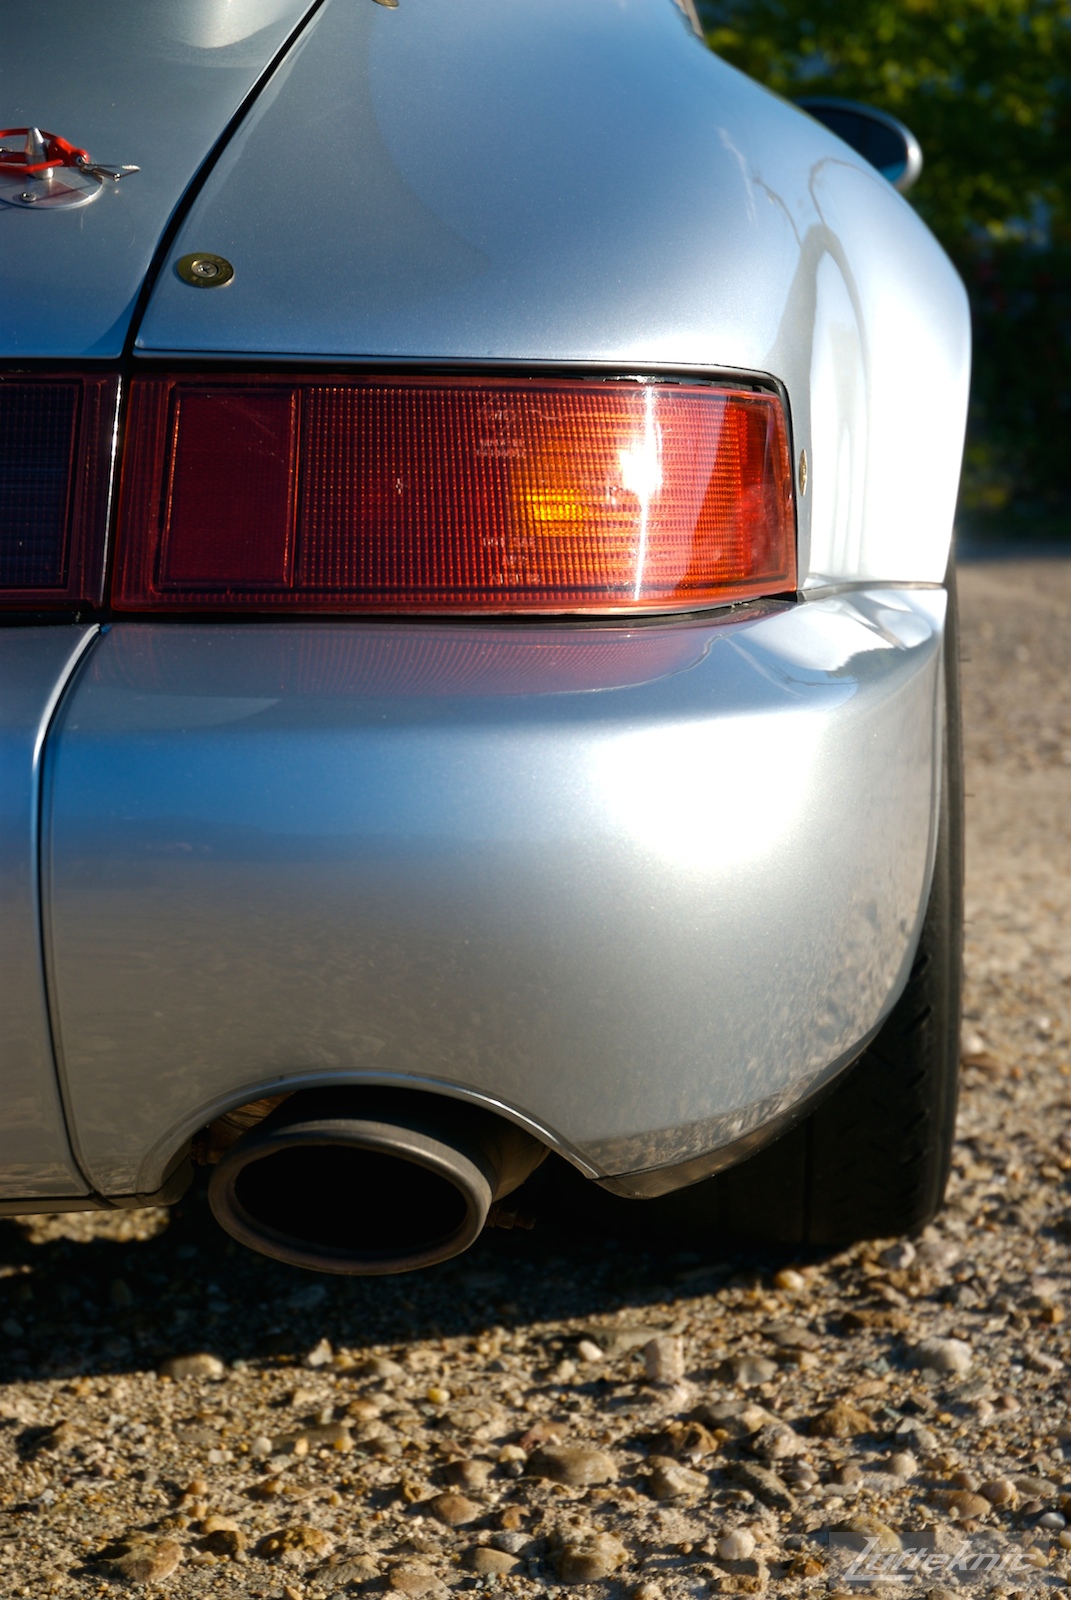 A rear detail shot of the bumper and exhaust tip on the 964 RS America.